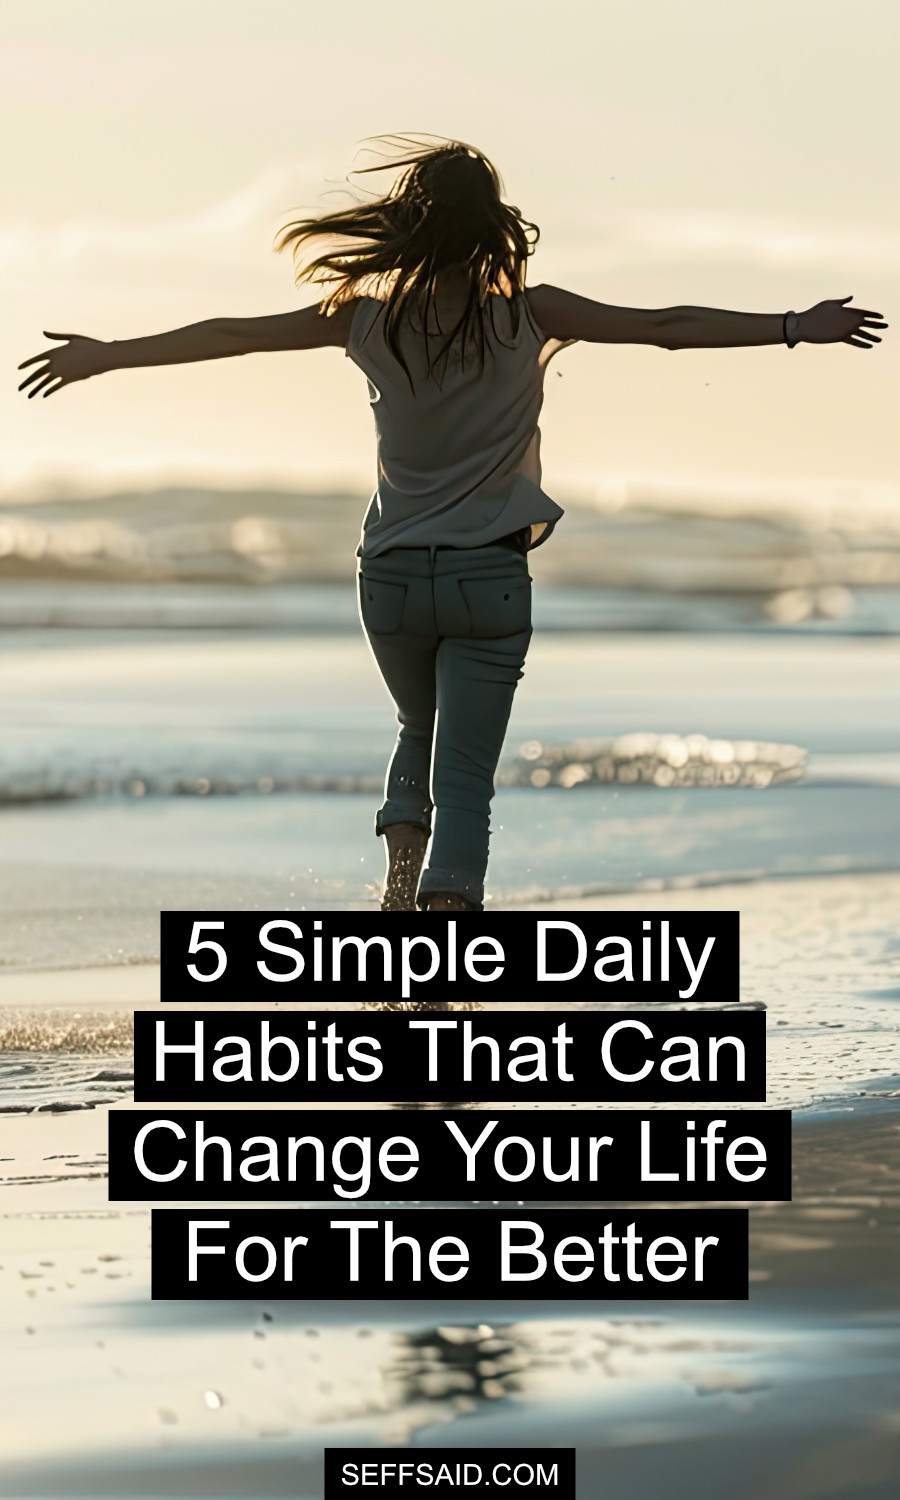 5 Simple Daily Habits That Can Change Your Life For The Better